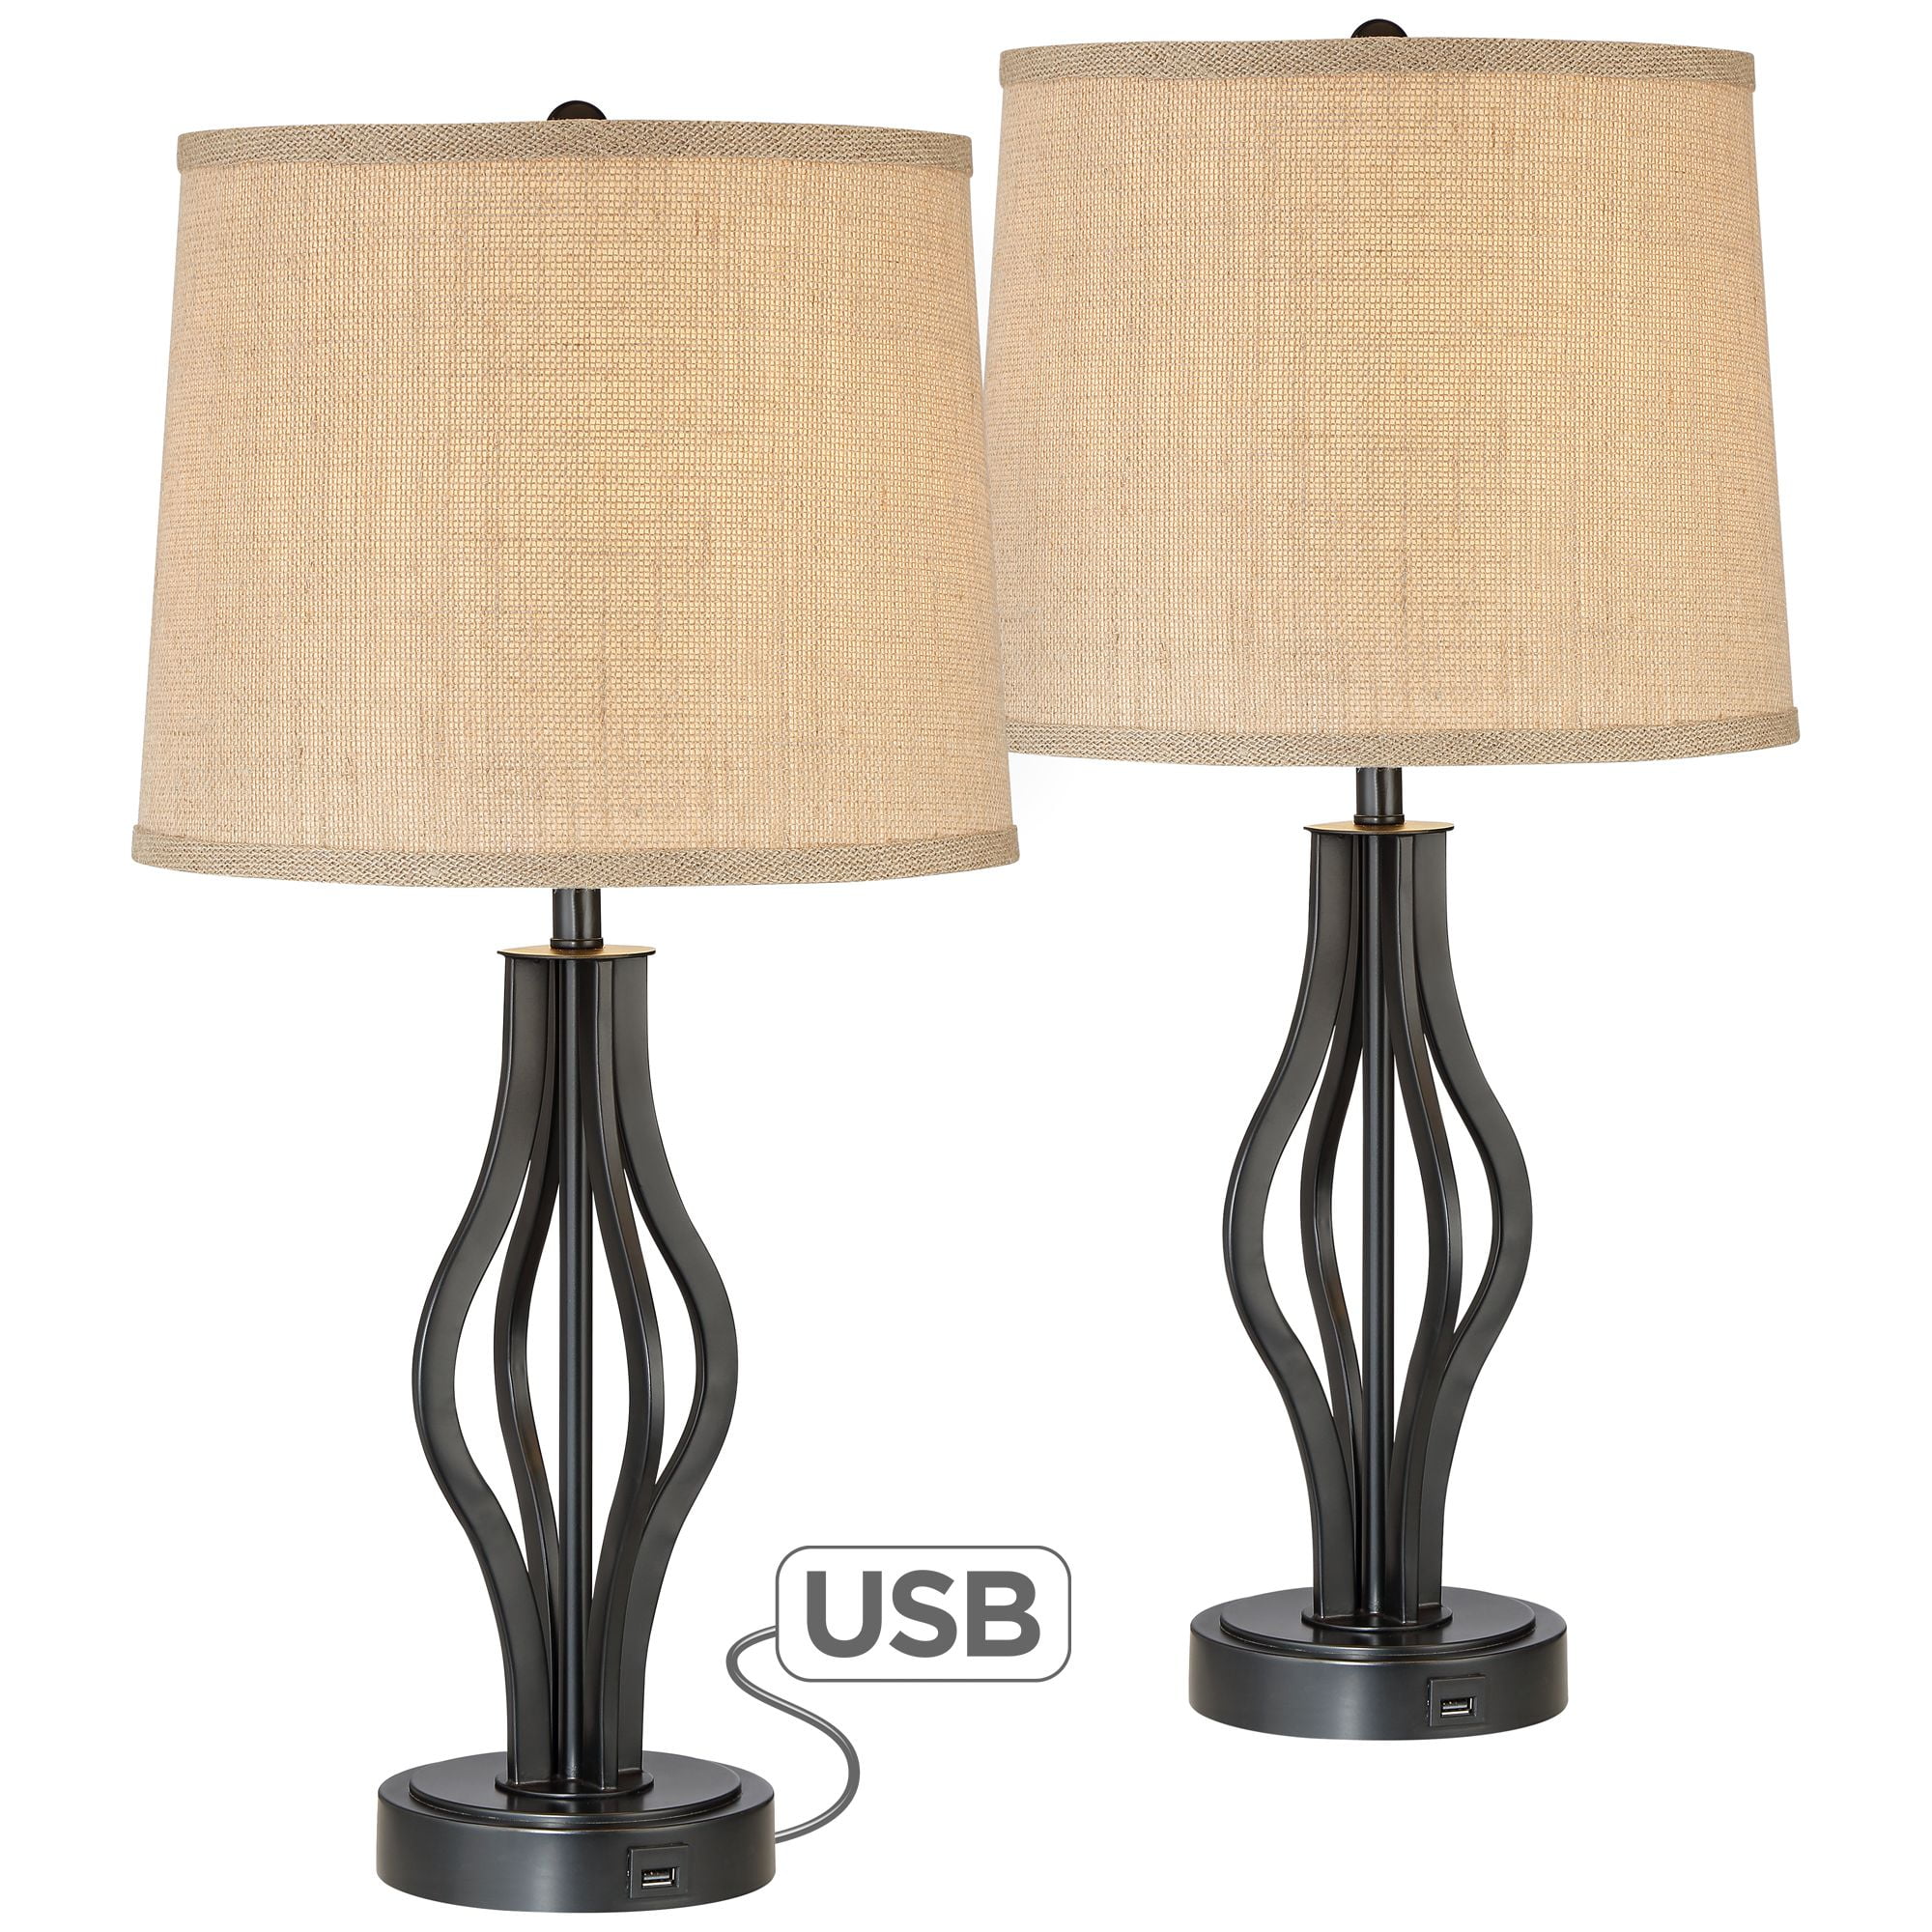 360 Lighting Modern Table Lamps Set Of, Small Table Lamps With Usb Port